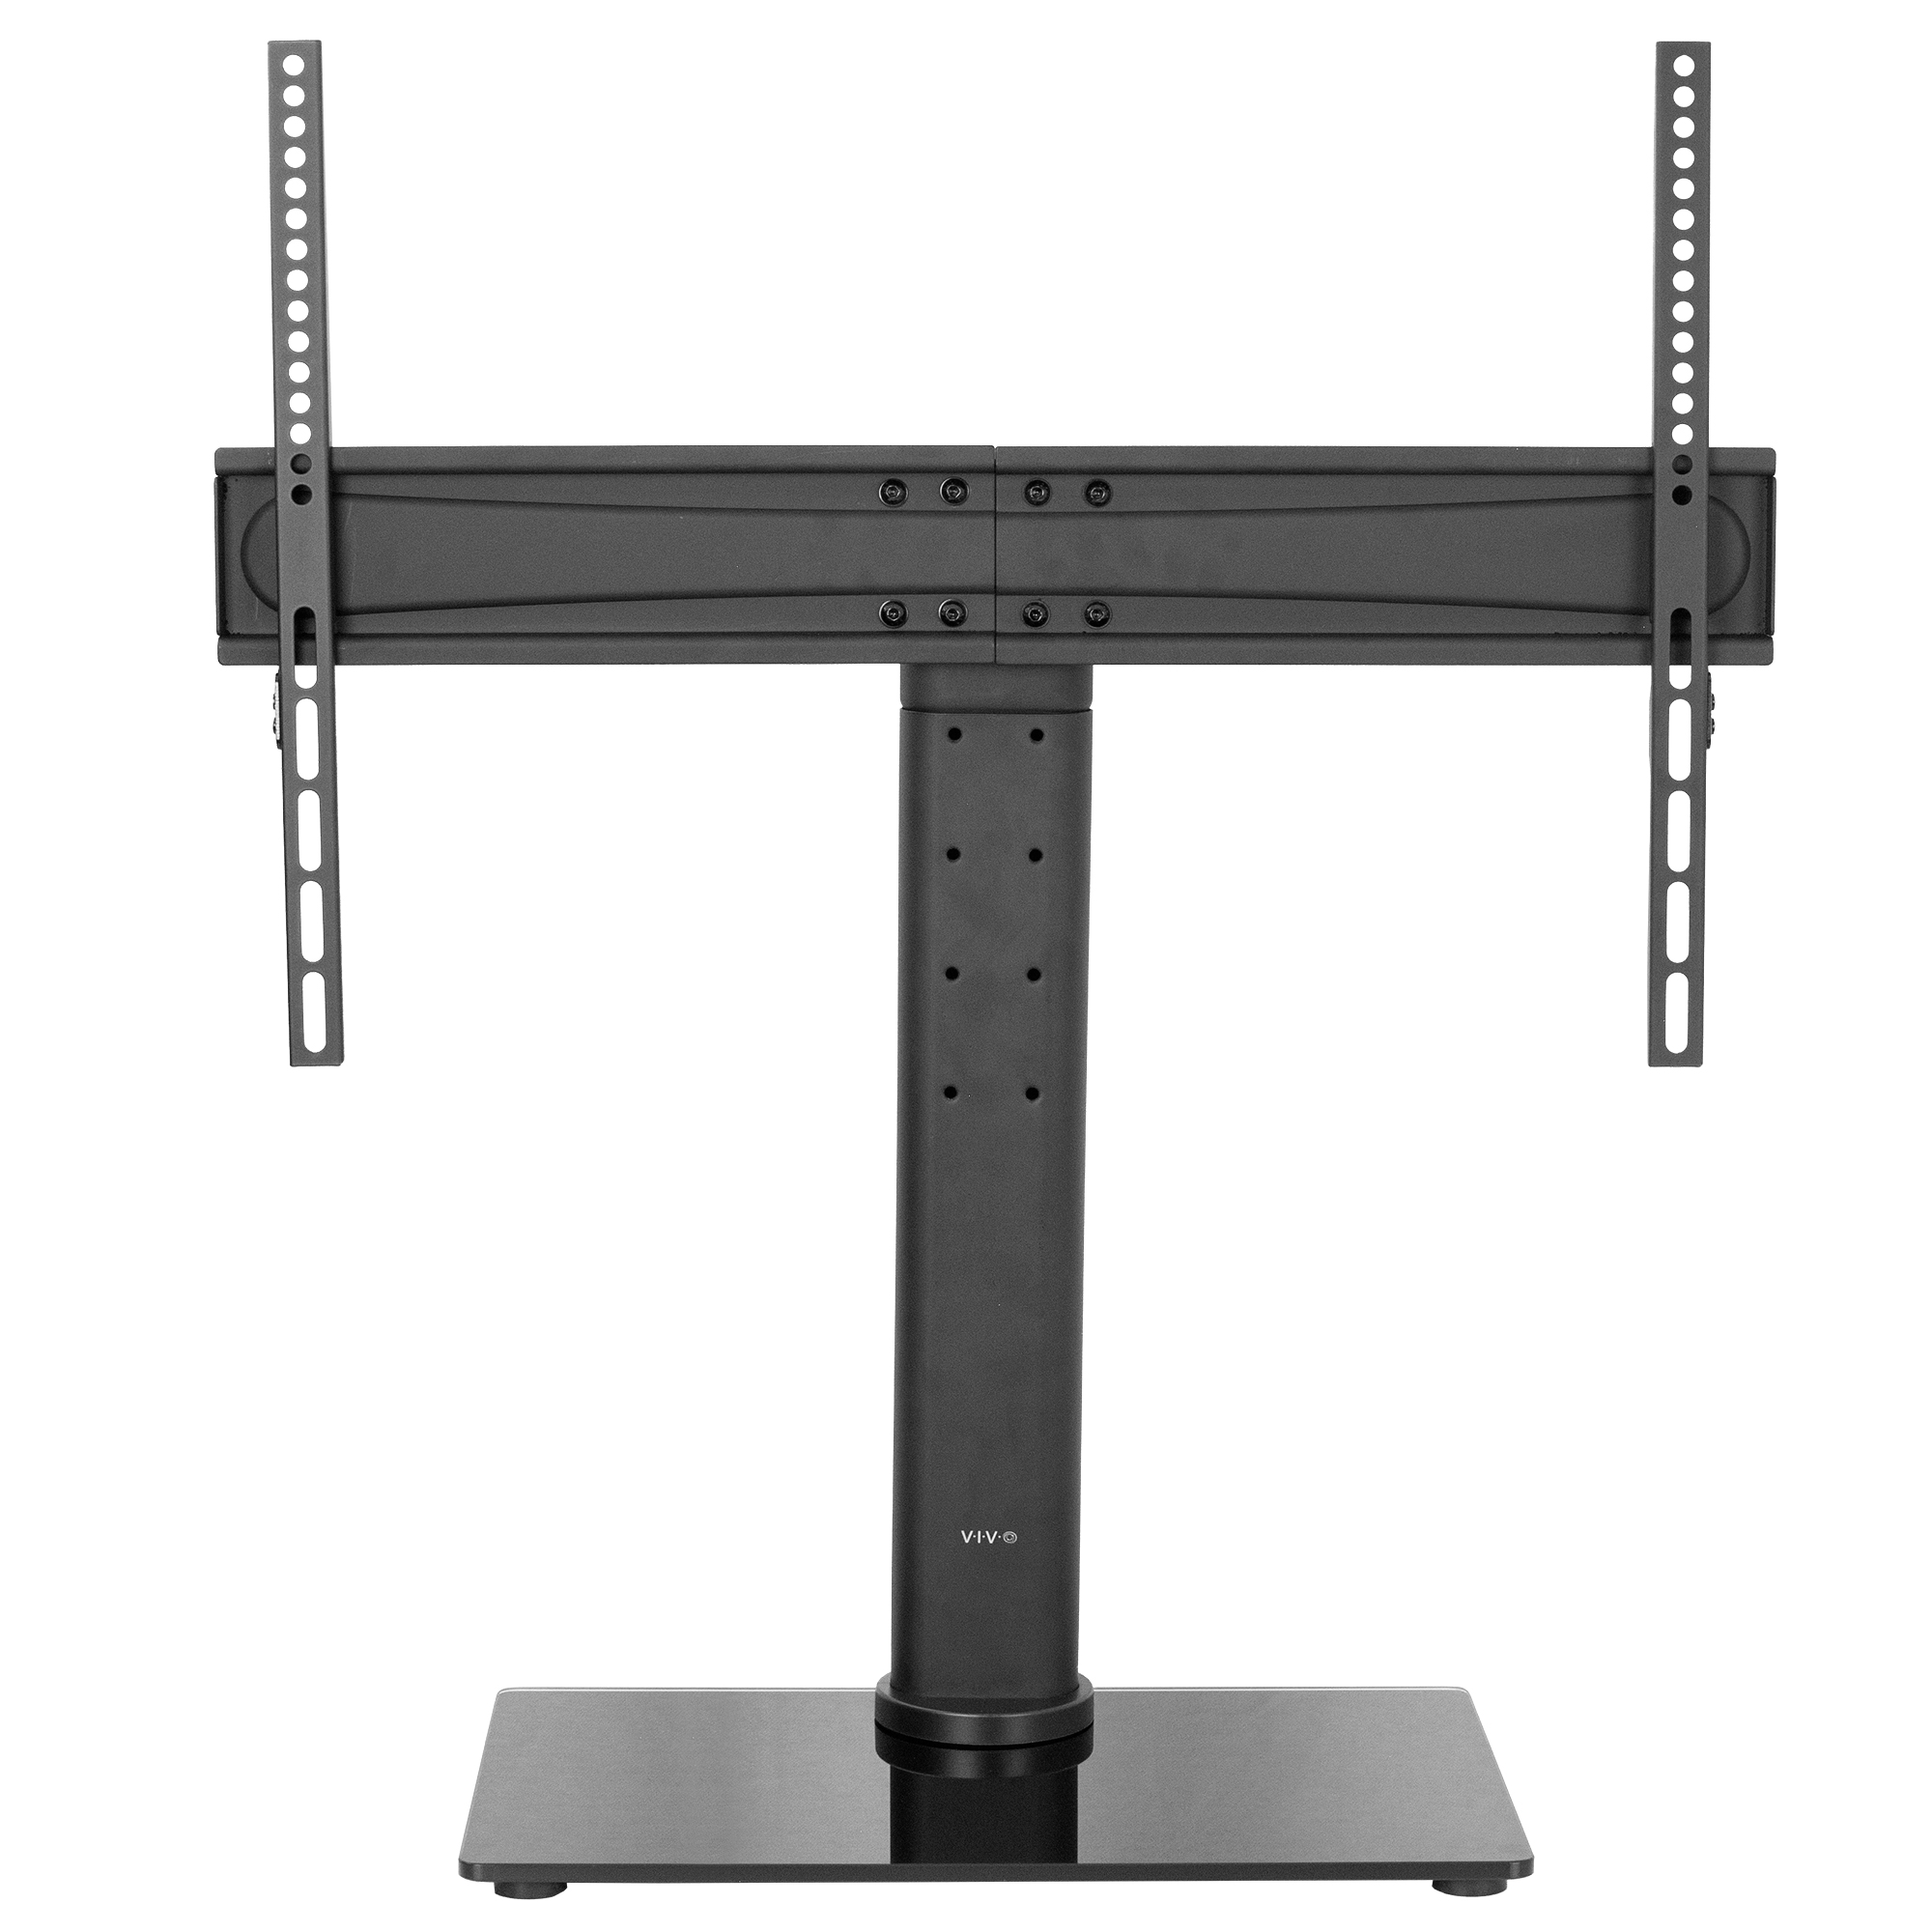 VIVO 32" to 55" LCD LED Flat Screen TV Mount Tabletop Desk Stand with Glass Base | Max VESA 600x400mm (STAND-TV00L) - image 1 of 6